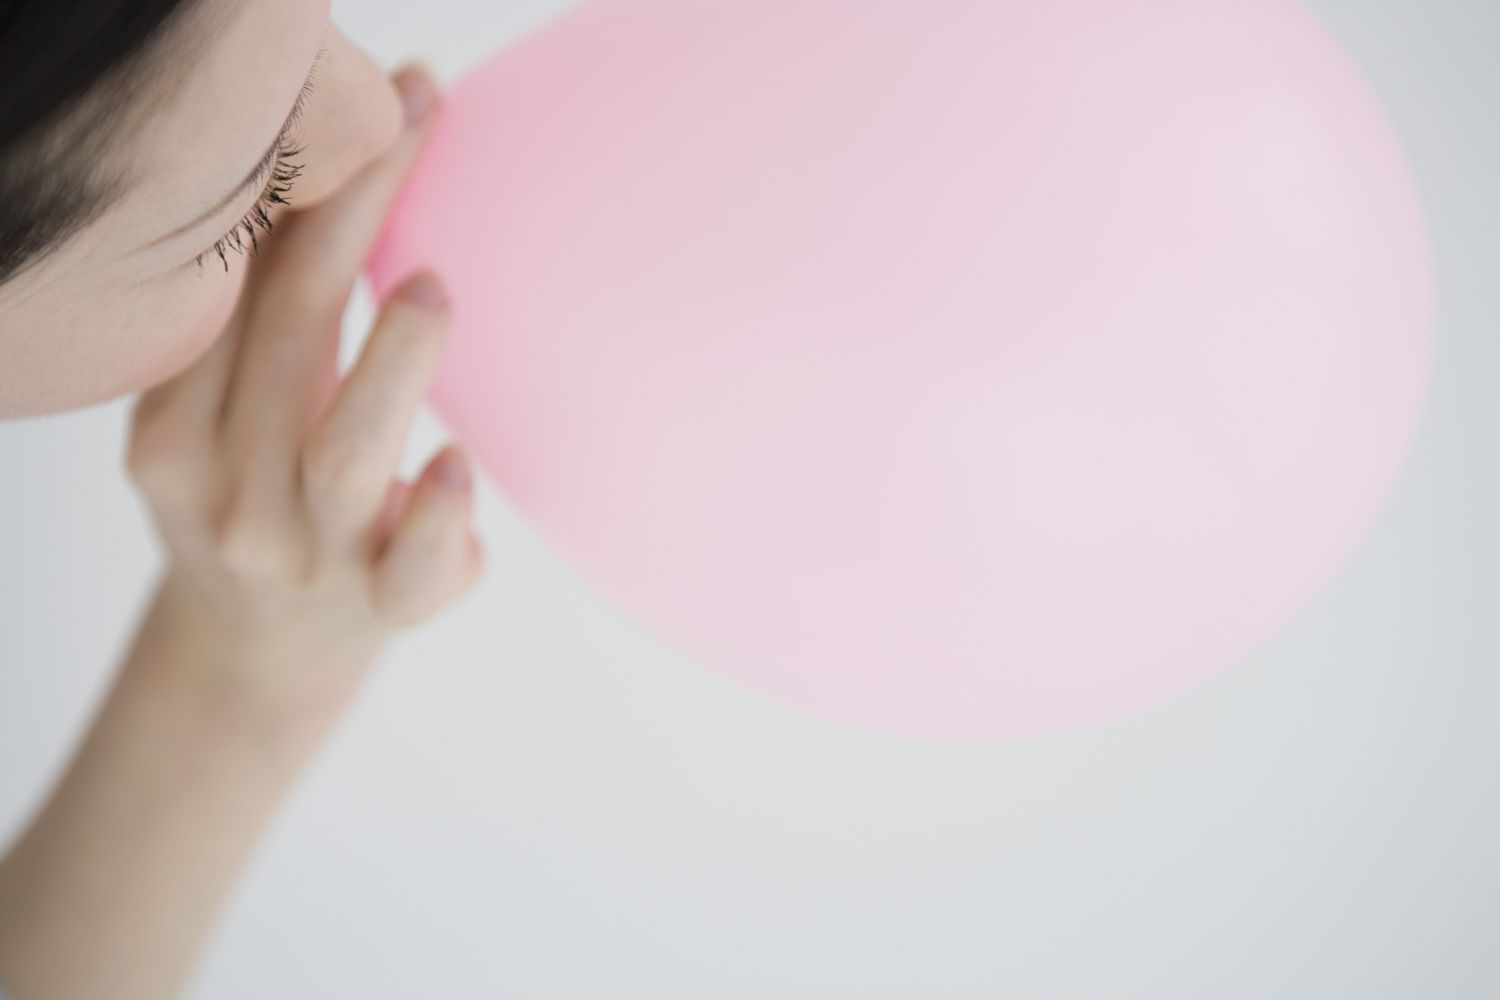 A person inhaling helium from a balloon